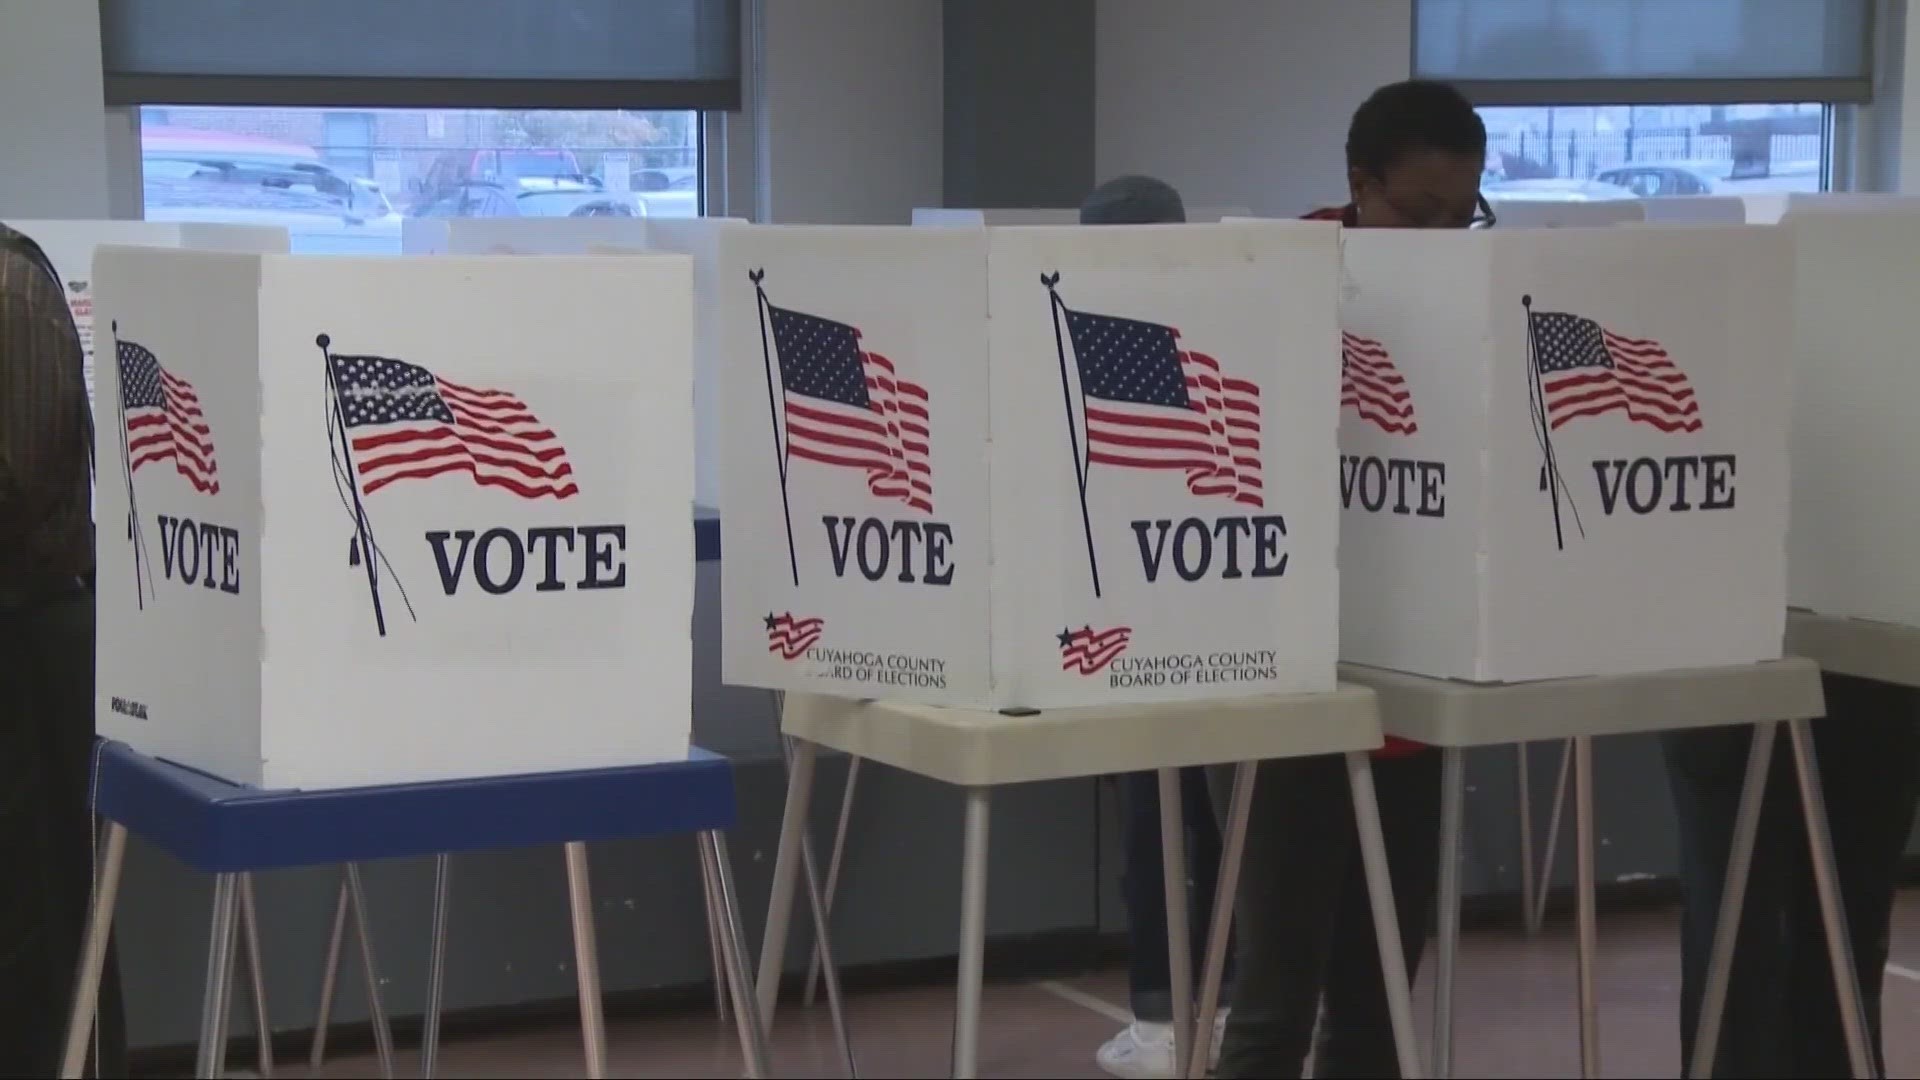 Polls will be open throughout Ohio for the May 2 election from 6:30 a.m. until 7:30 p.m. for in-person voting.